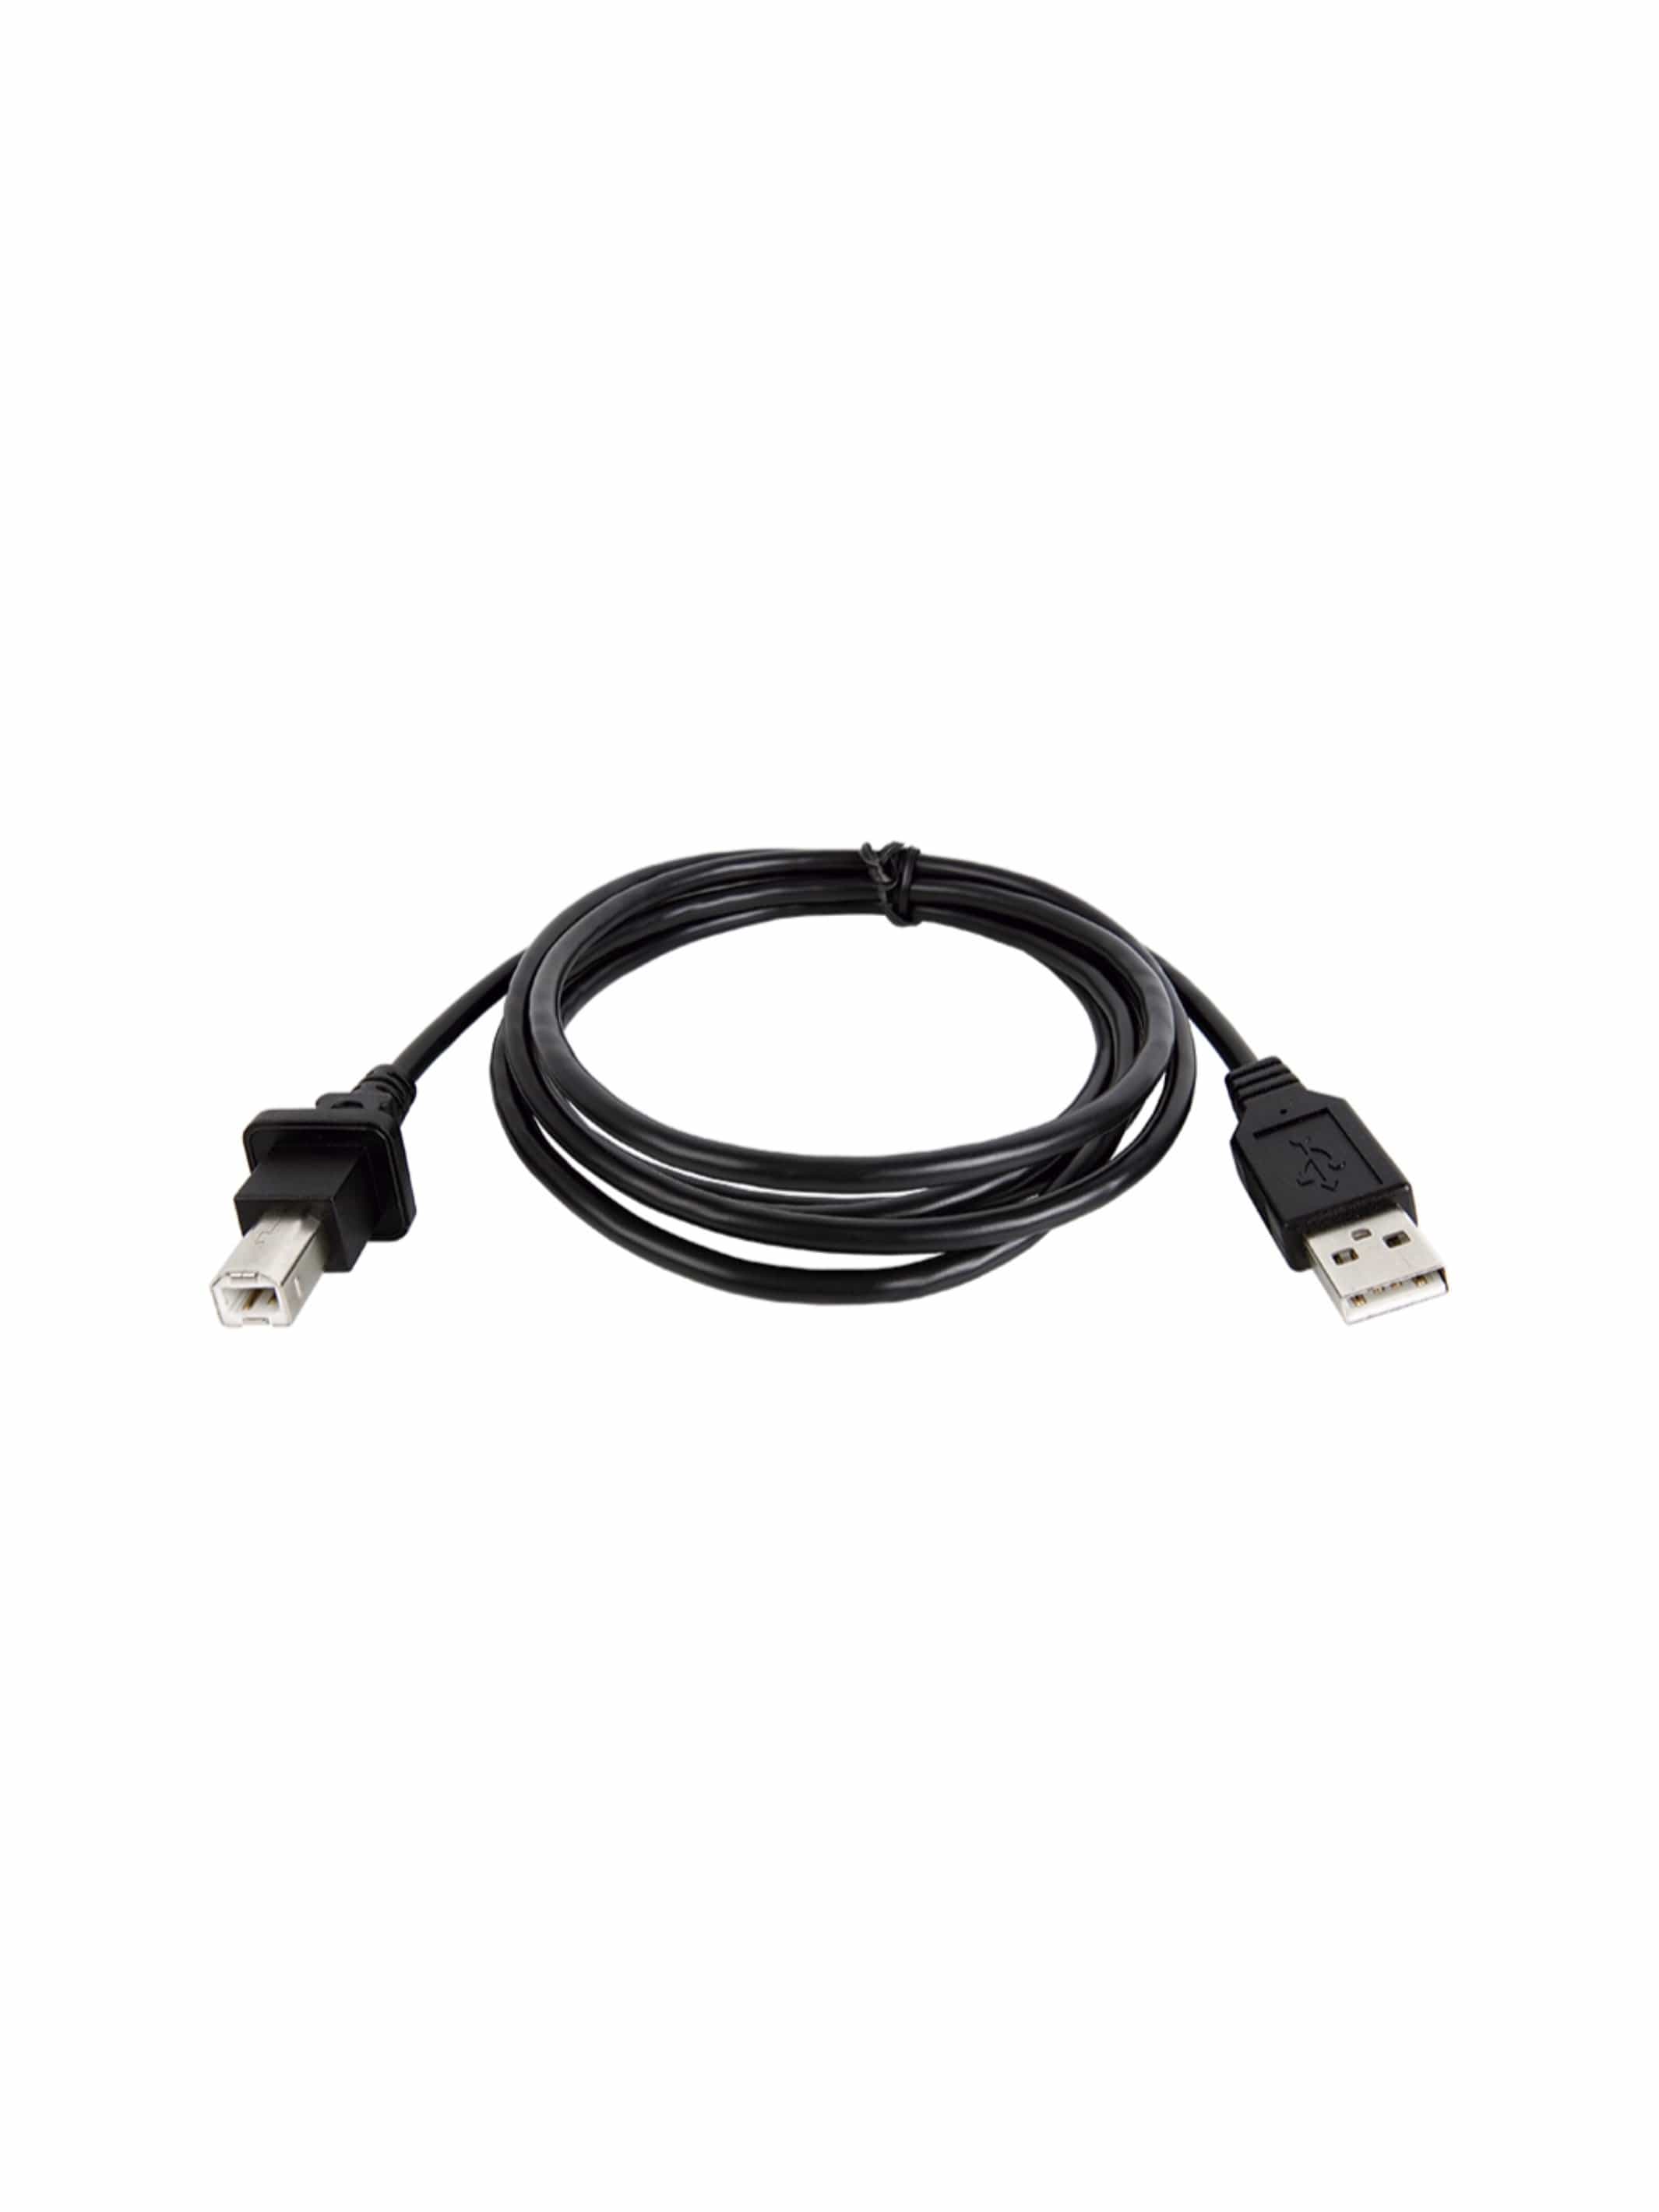 JDC107.9 USB Cable - Jaltest Deluxe Diagnostic Computer Kit for Commercial Vehicle, Construction & Agriculture Equipment